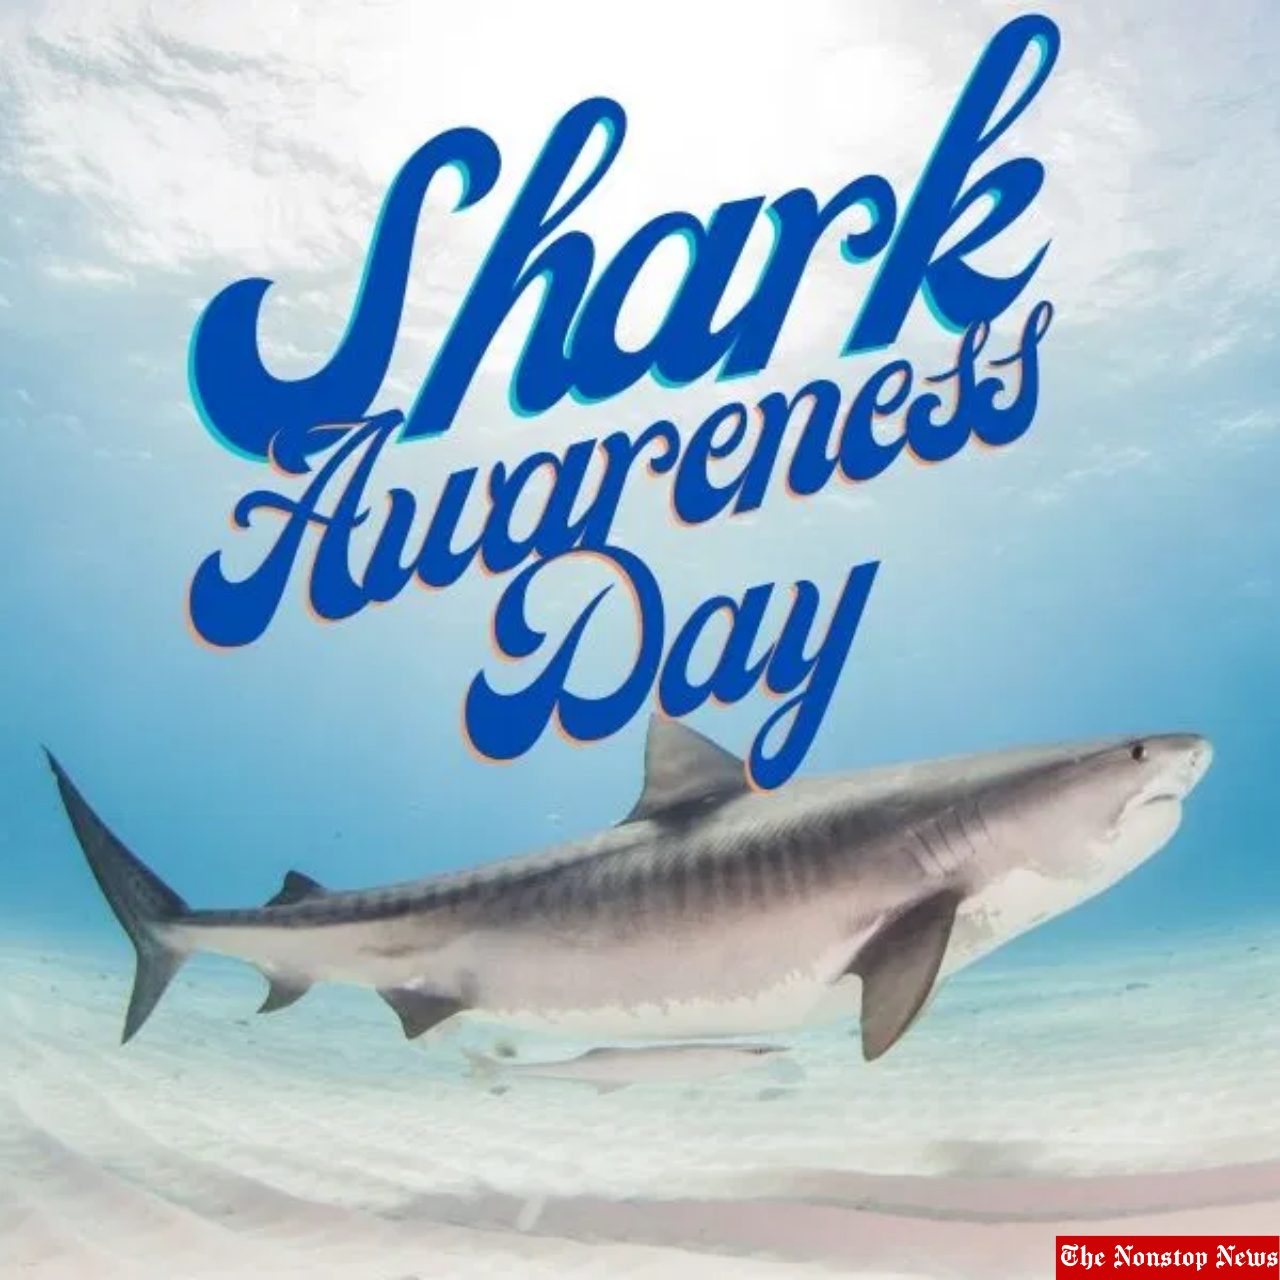 Shark Awareness Day 2021: Quotes, Images, Messages, and More to create awareness